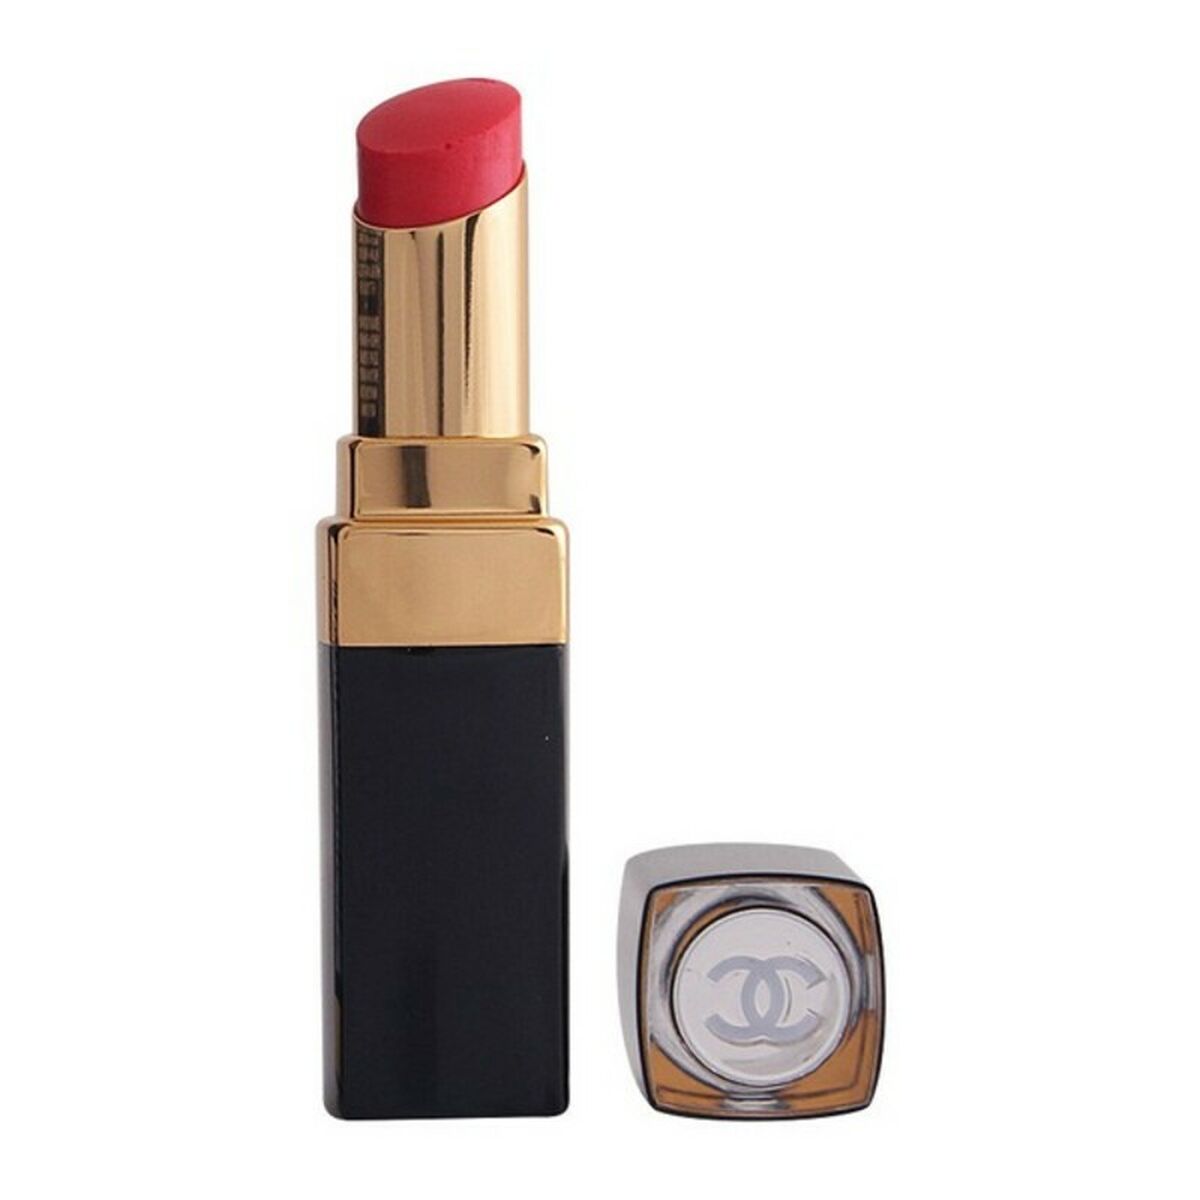 Läppbalsam rouge coco chanel 3 g